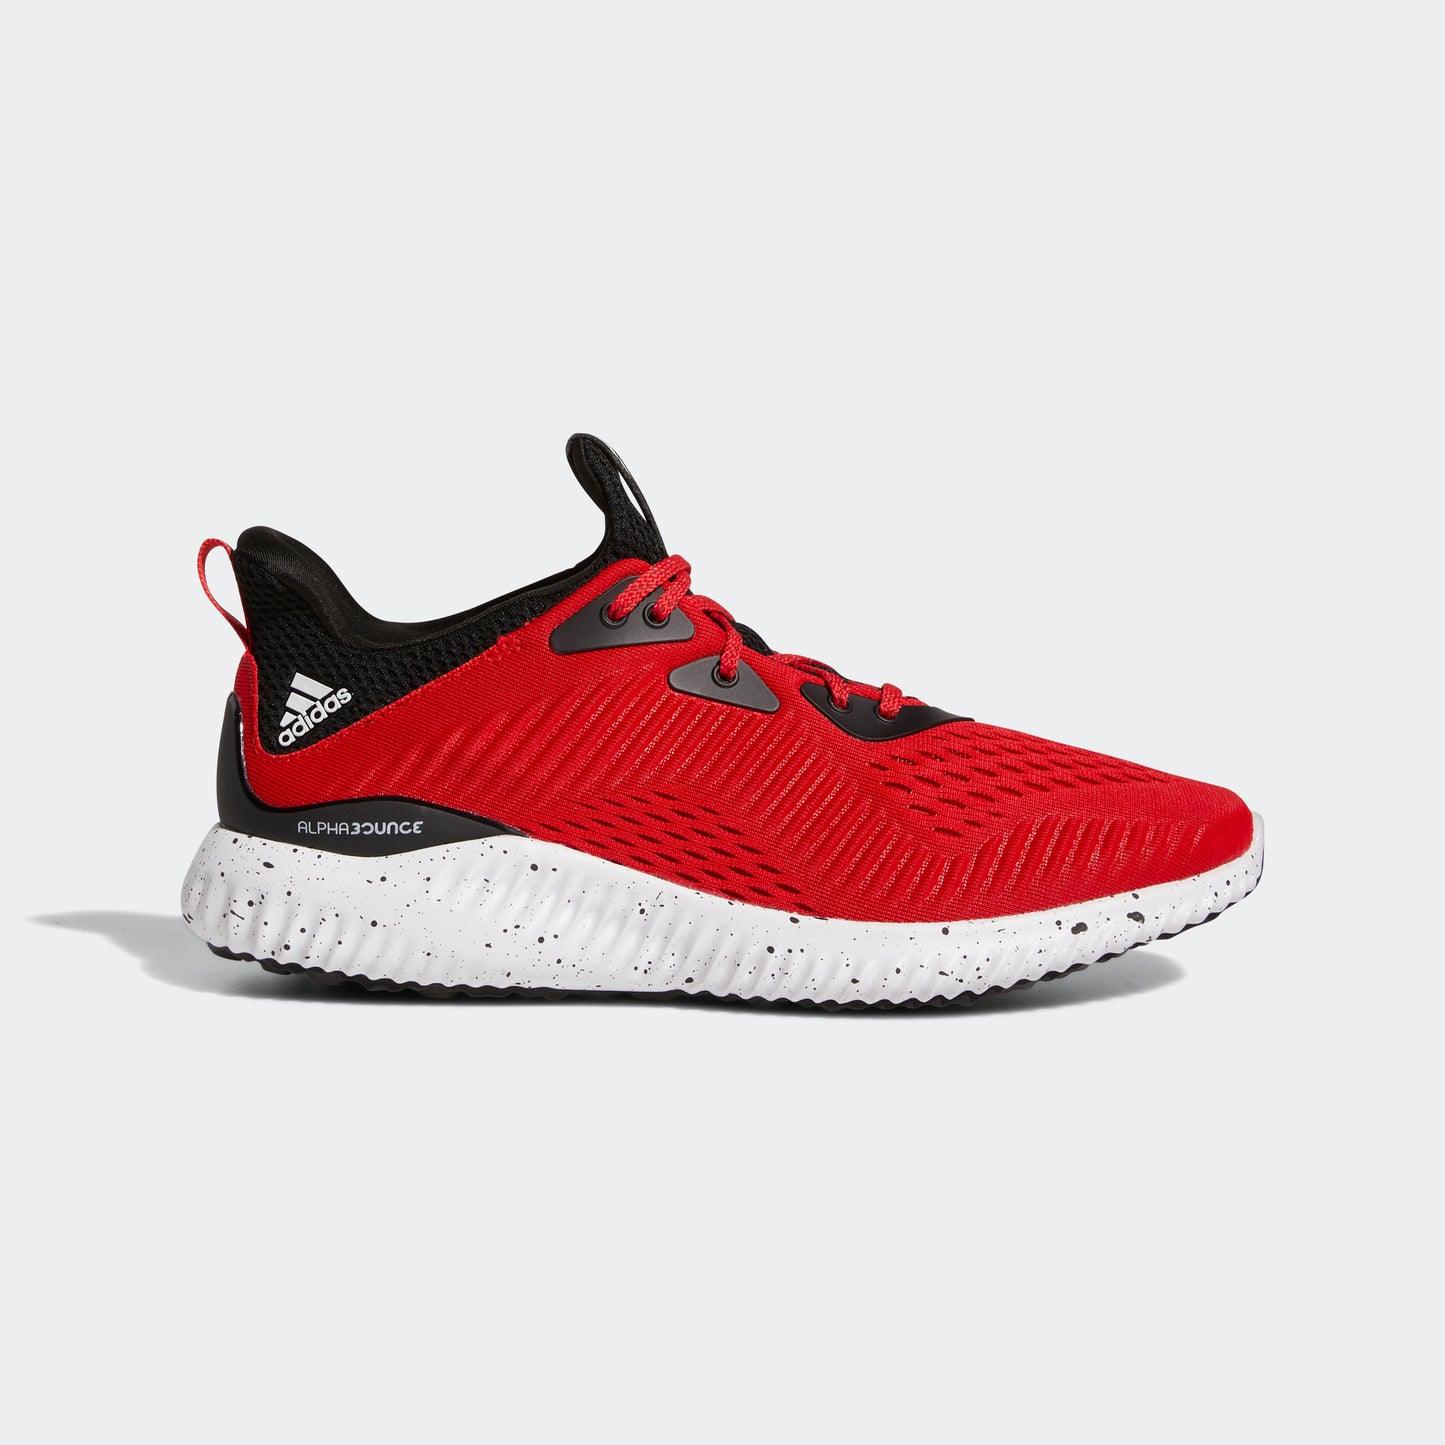 adidas Alphabounce 1 Shoes | Black/Red | Men's